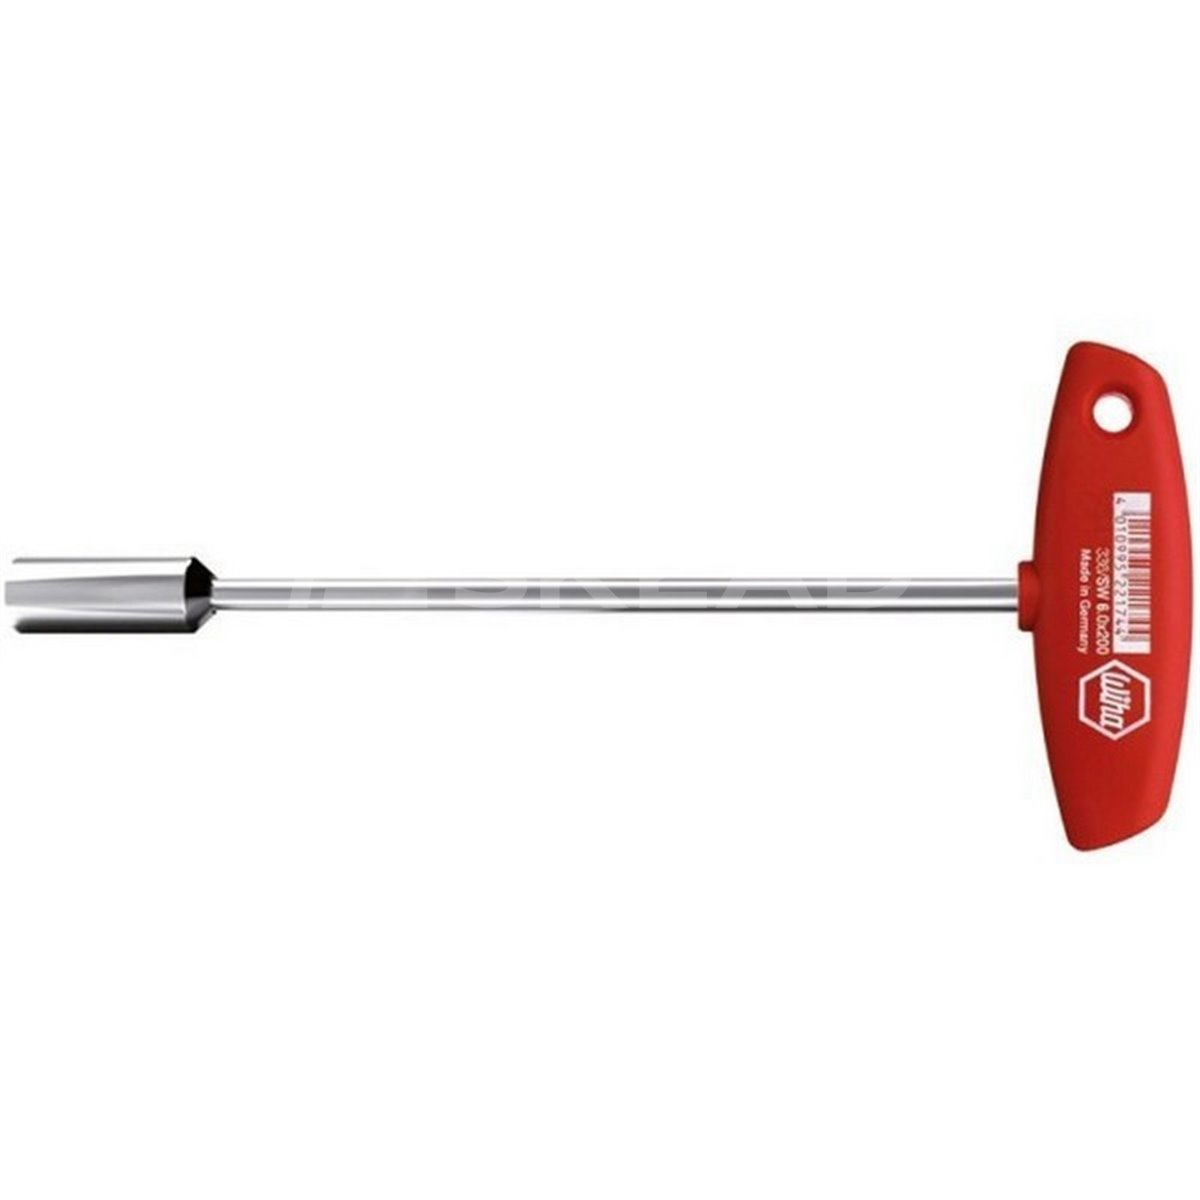 Socket wrench with T-handle. Classic 336 10 125mm Wiha 00977.